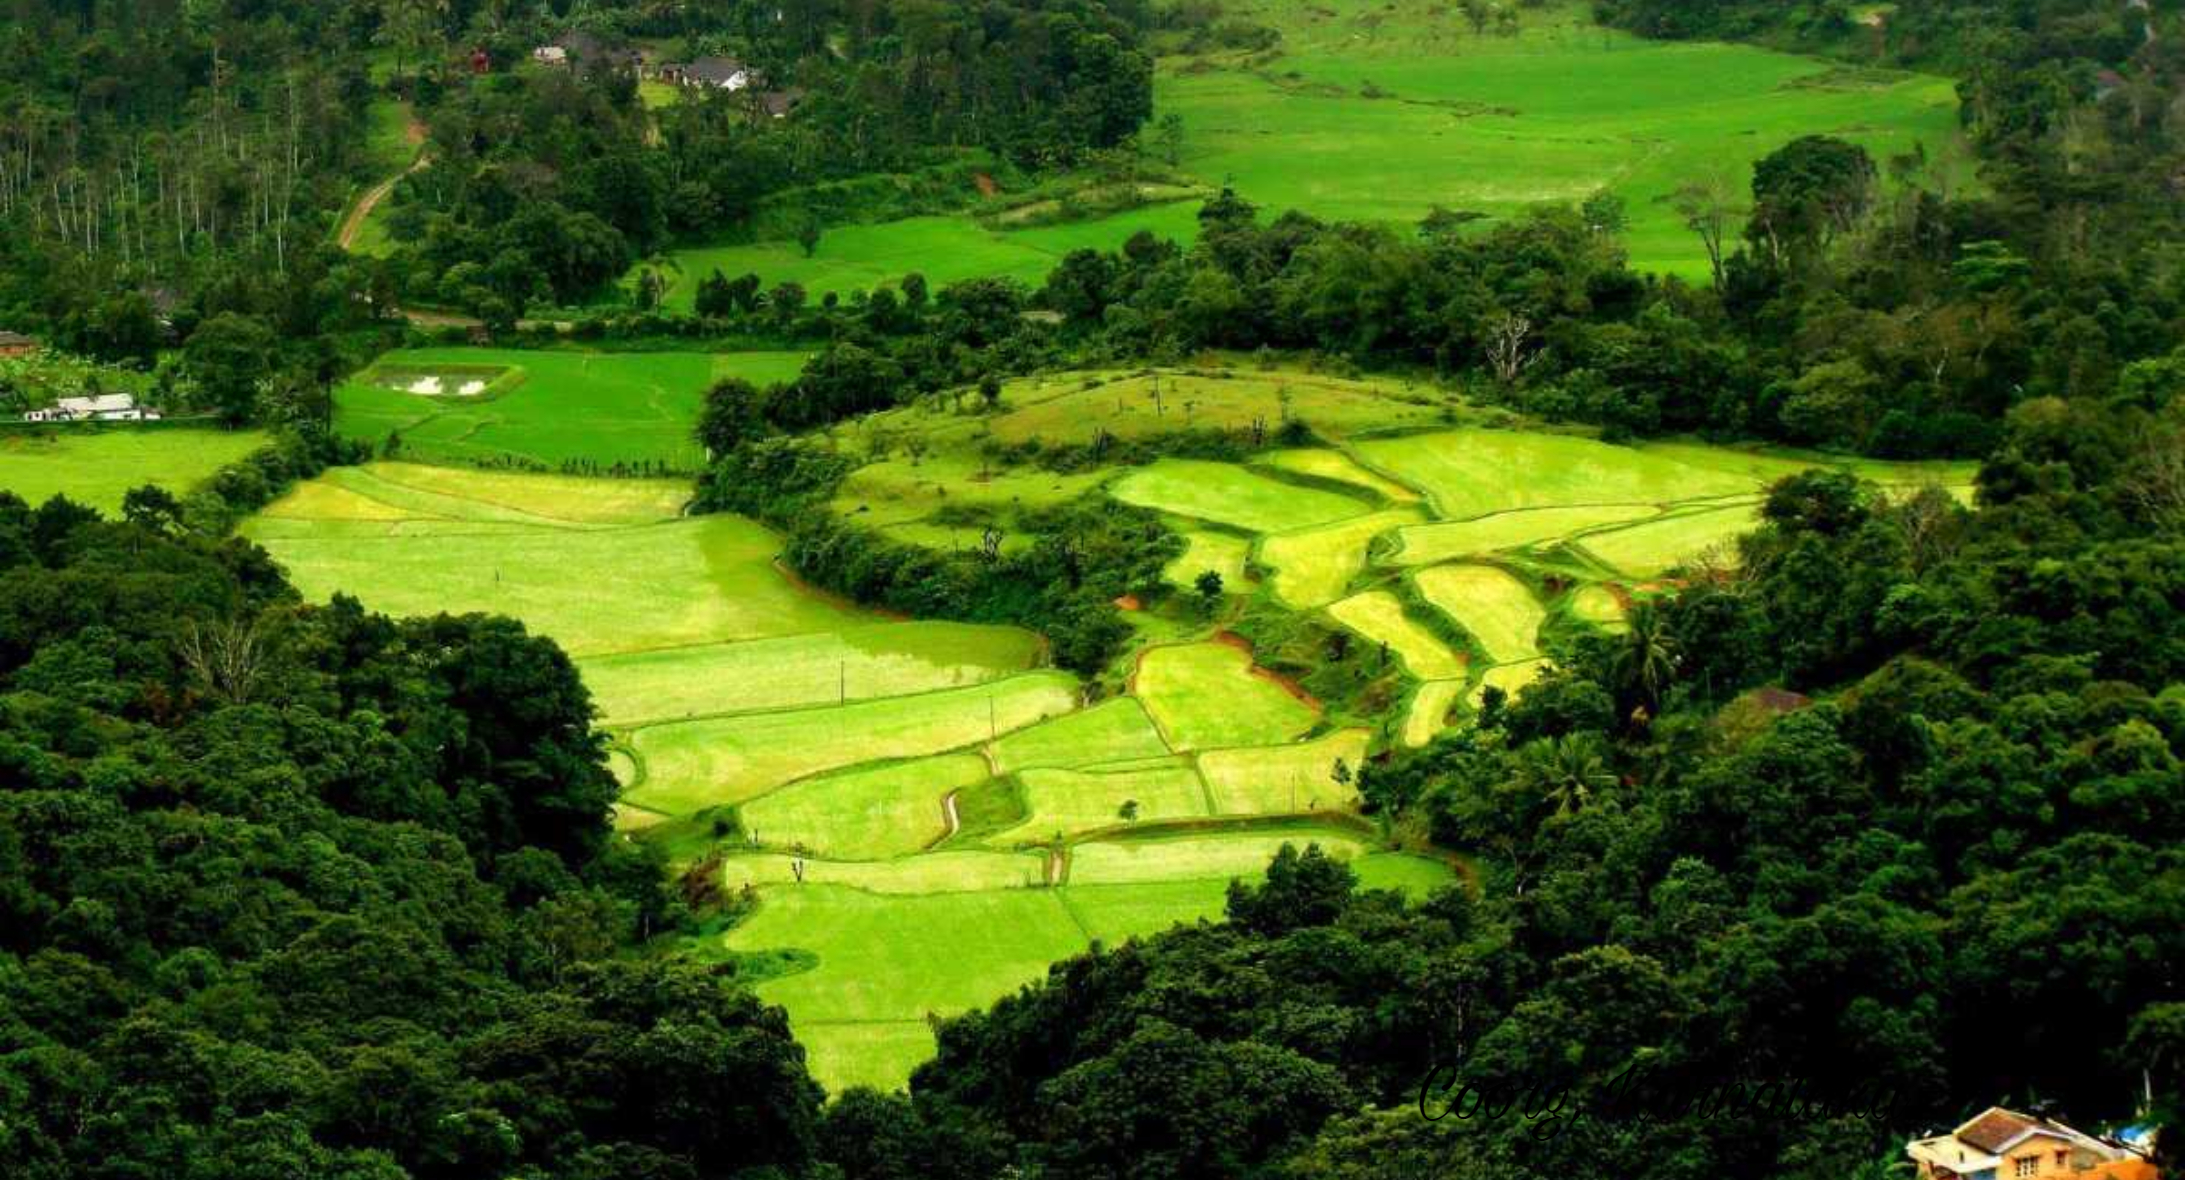 coorg karnataka, best hill stations in india, india's top hill stations, jodhpur cabs